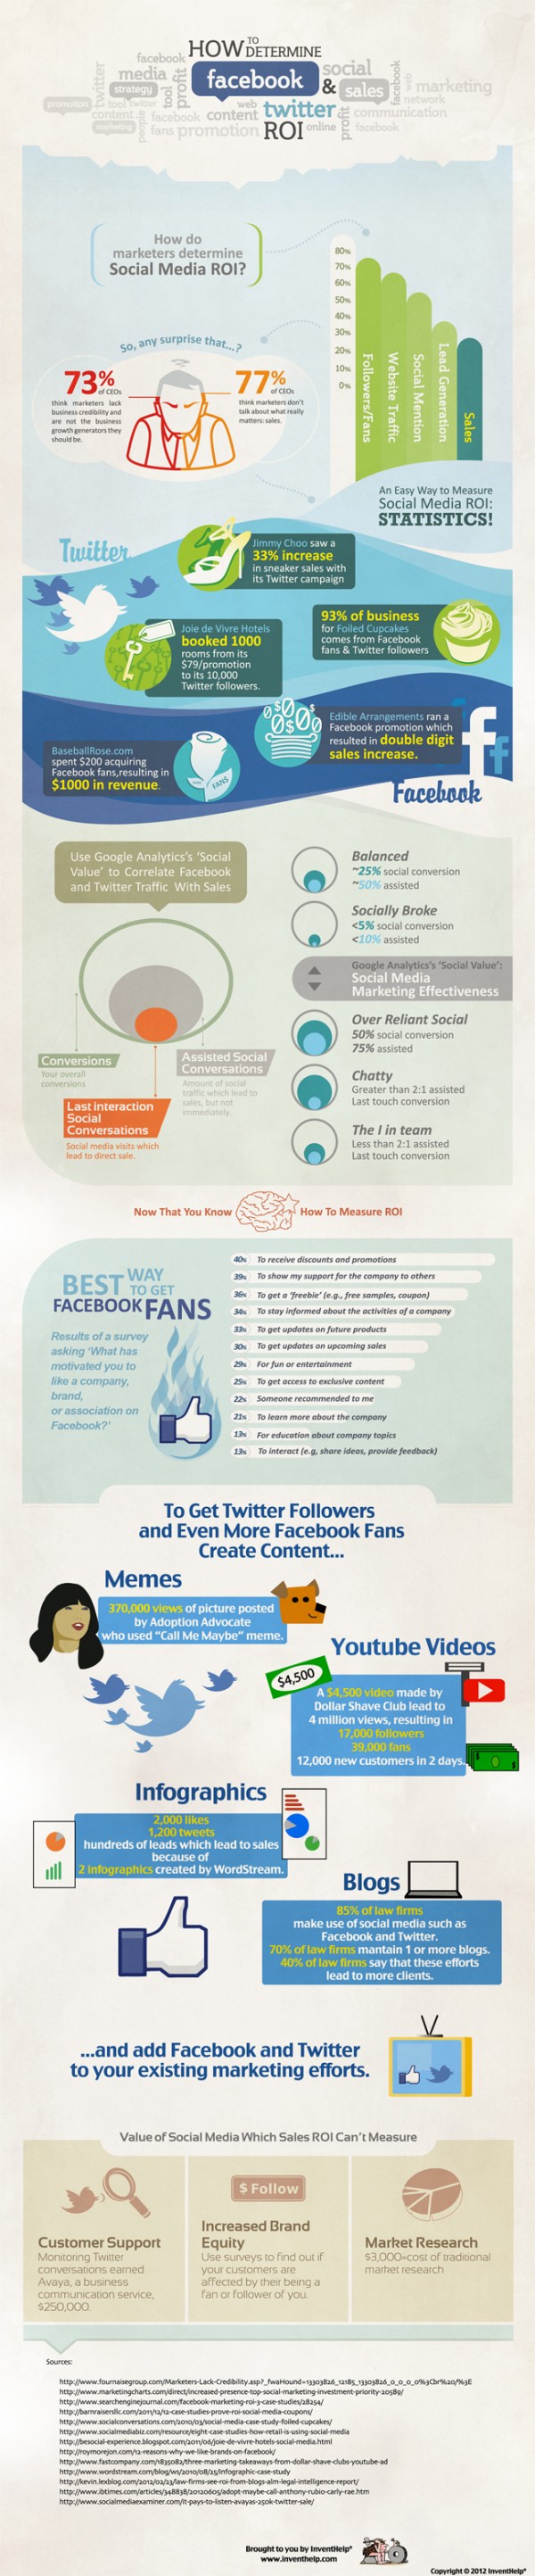 Calculate Facebook and Twitter ROI